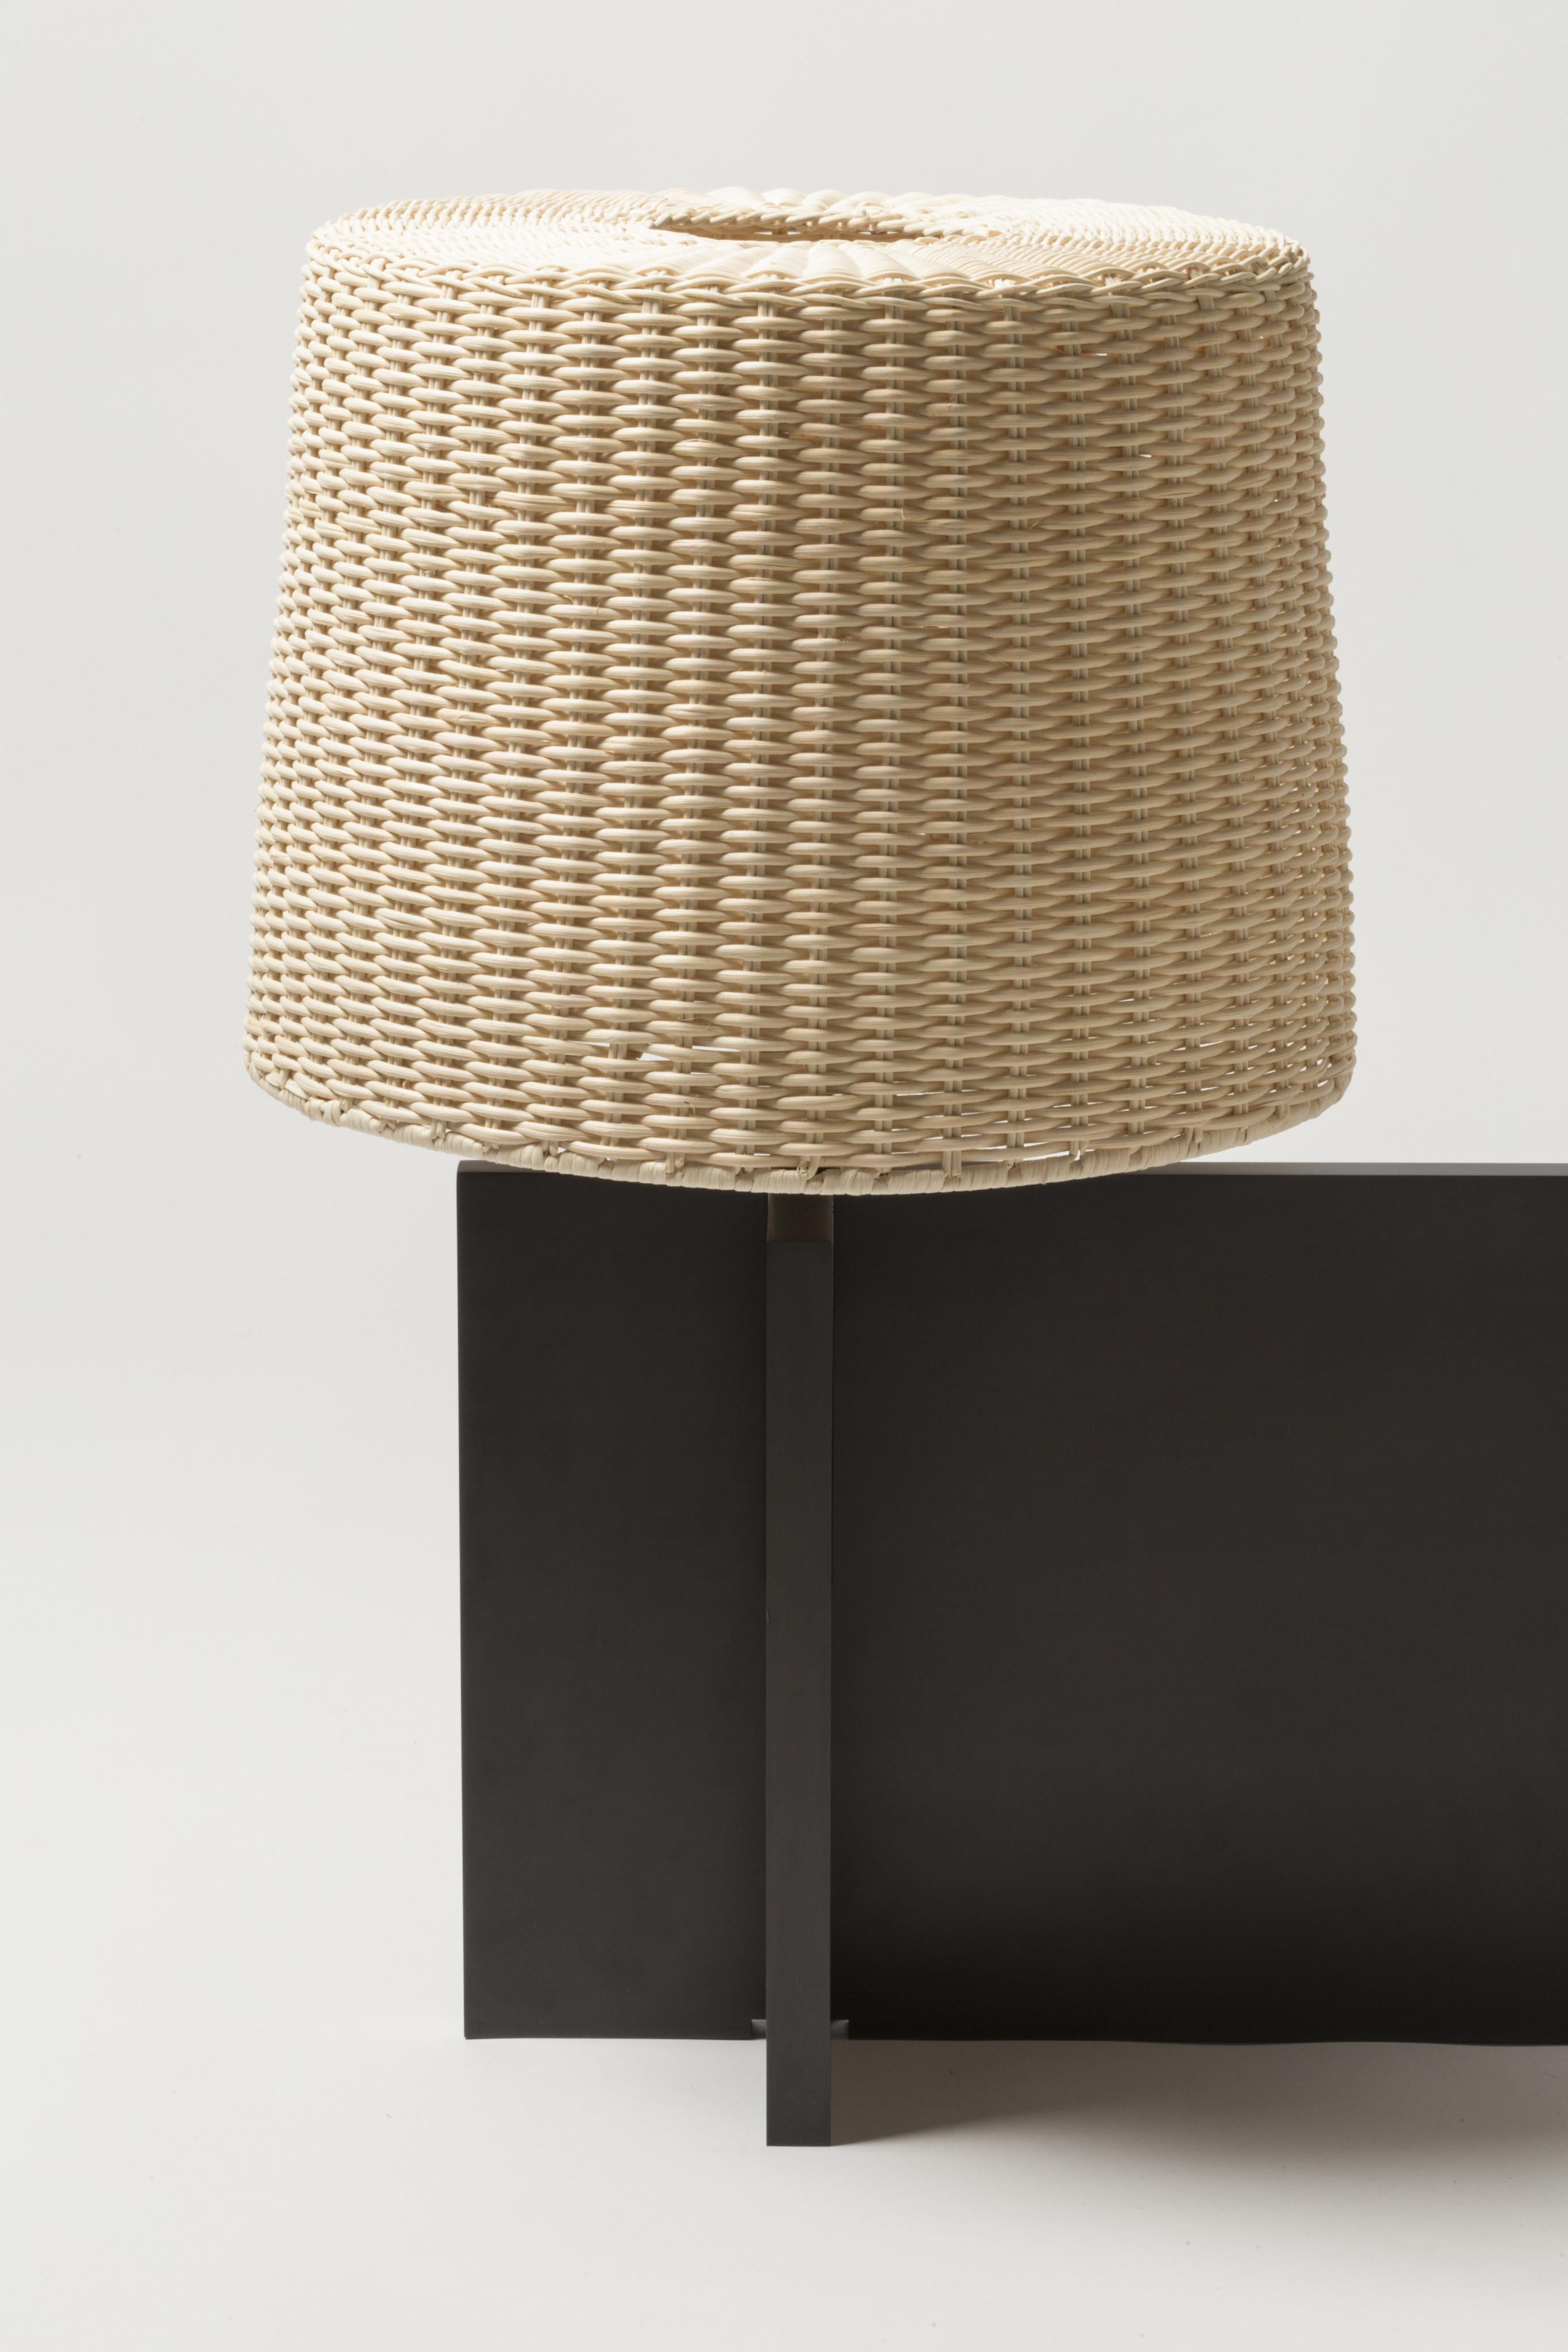 Lipari Table Lamp (Large) -- Stephane Parmentier x Giobagnara

Metal finishing has to be indicated; chrome/brass/bronze available. Shade is available only in natural rattan.

Embracing sleek designs and beautiful materials, the Stephane Parmentier